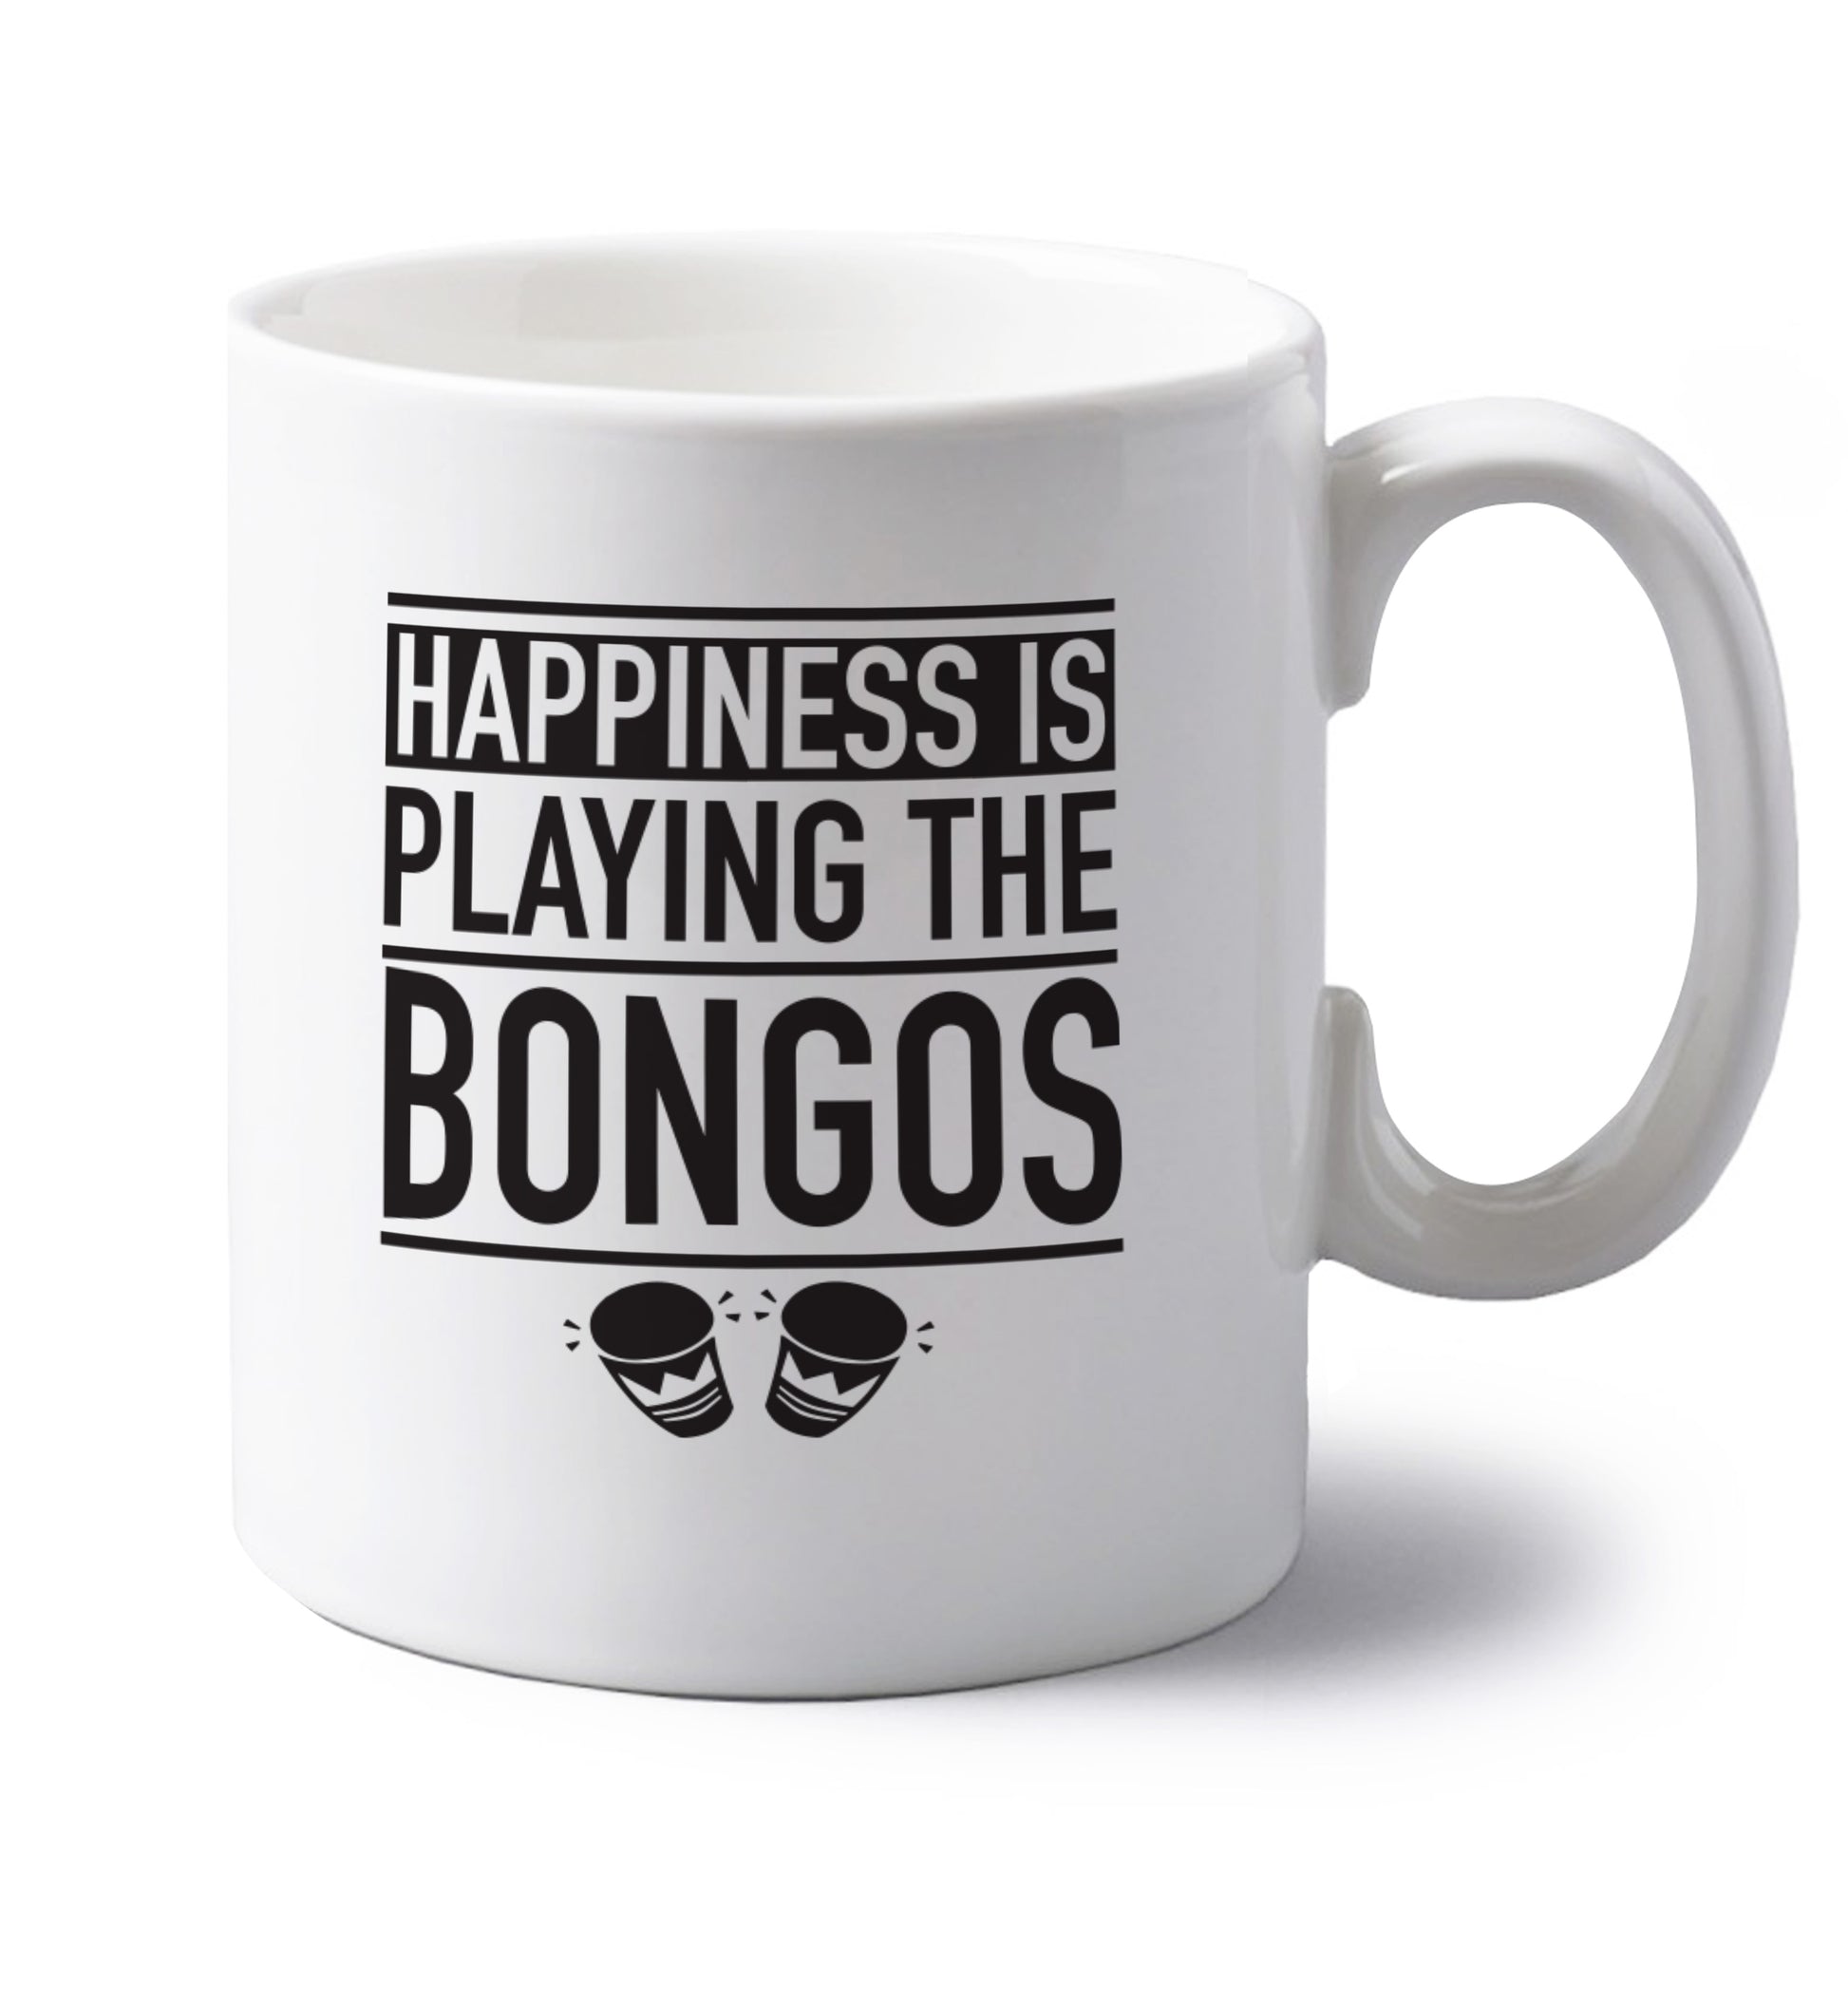 Happiness is playing the bongos left handed white ceramic mug 